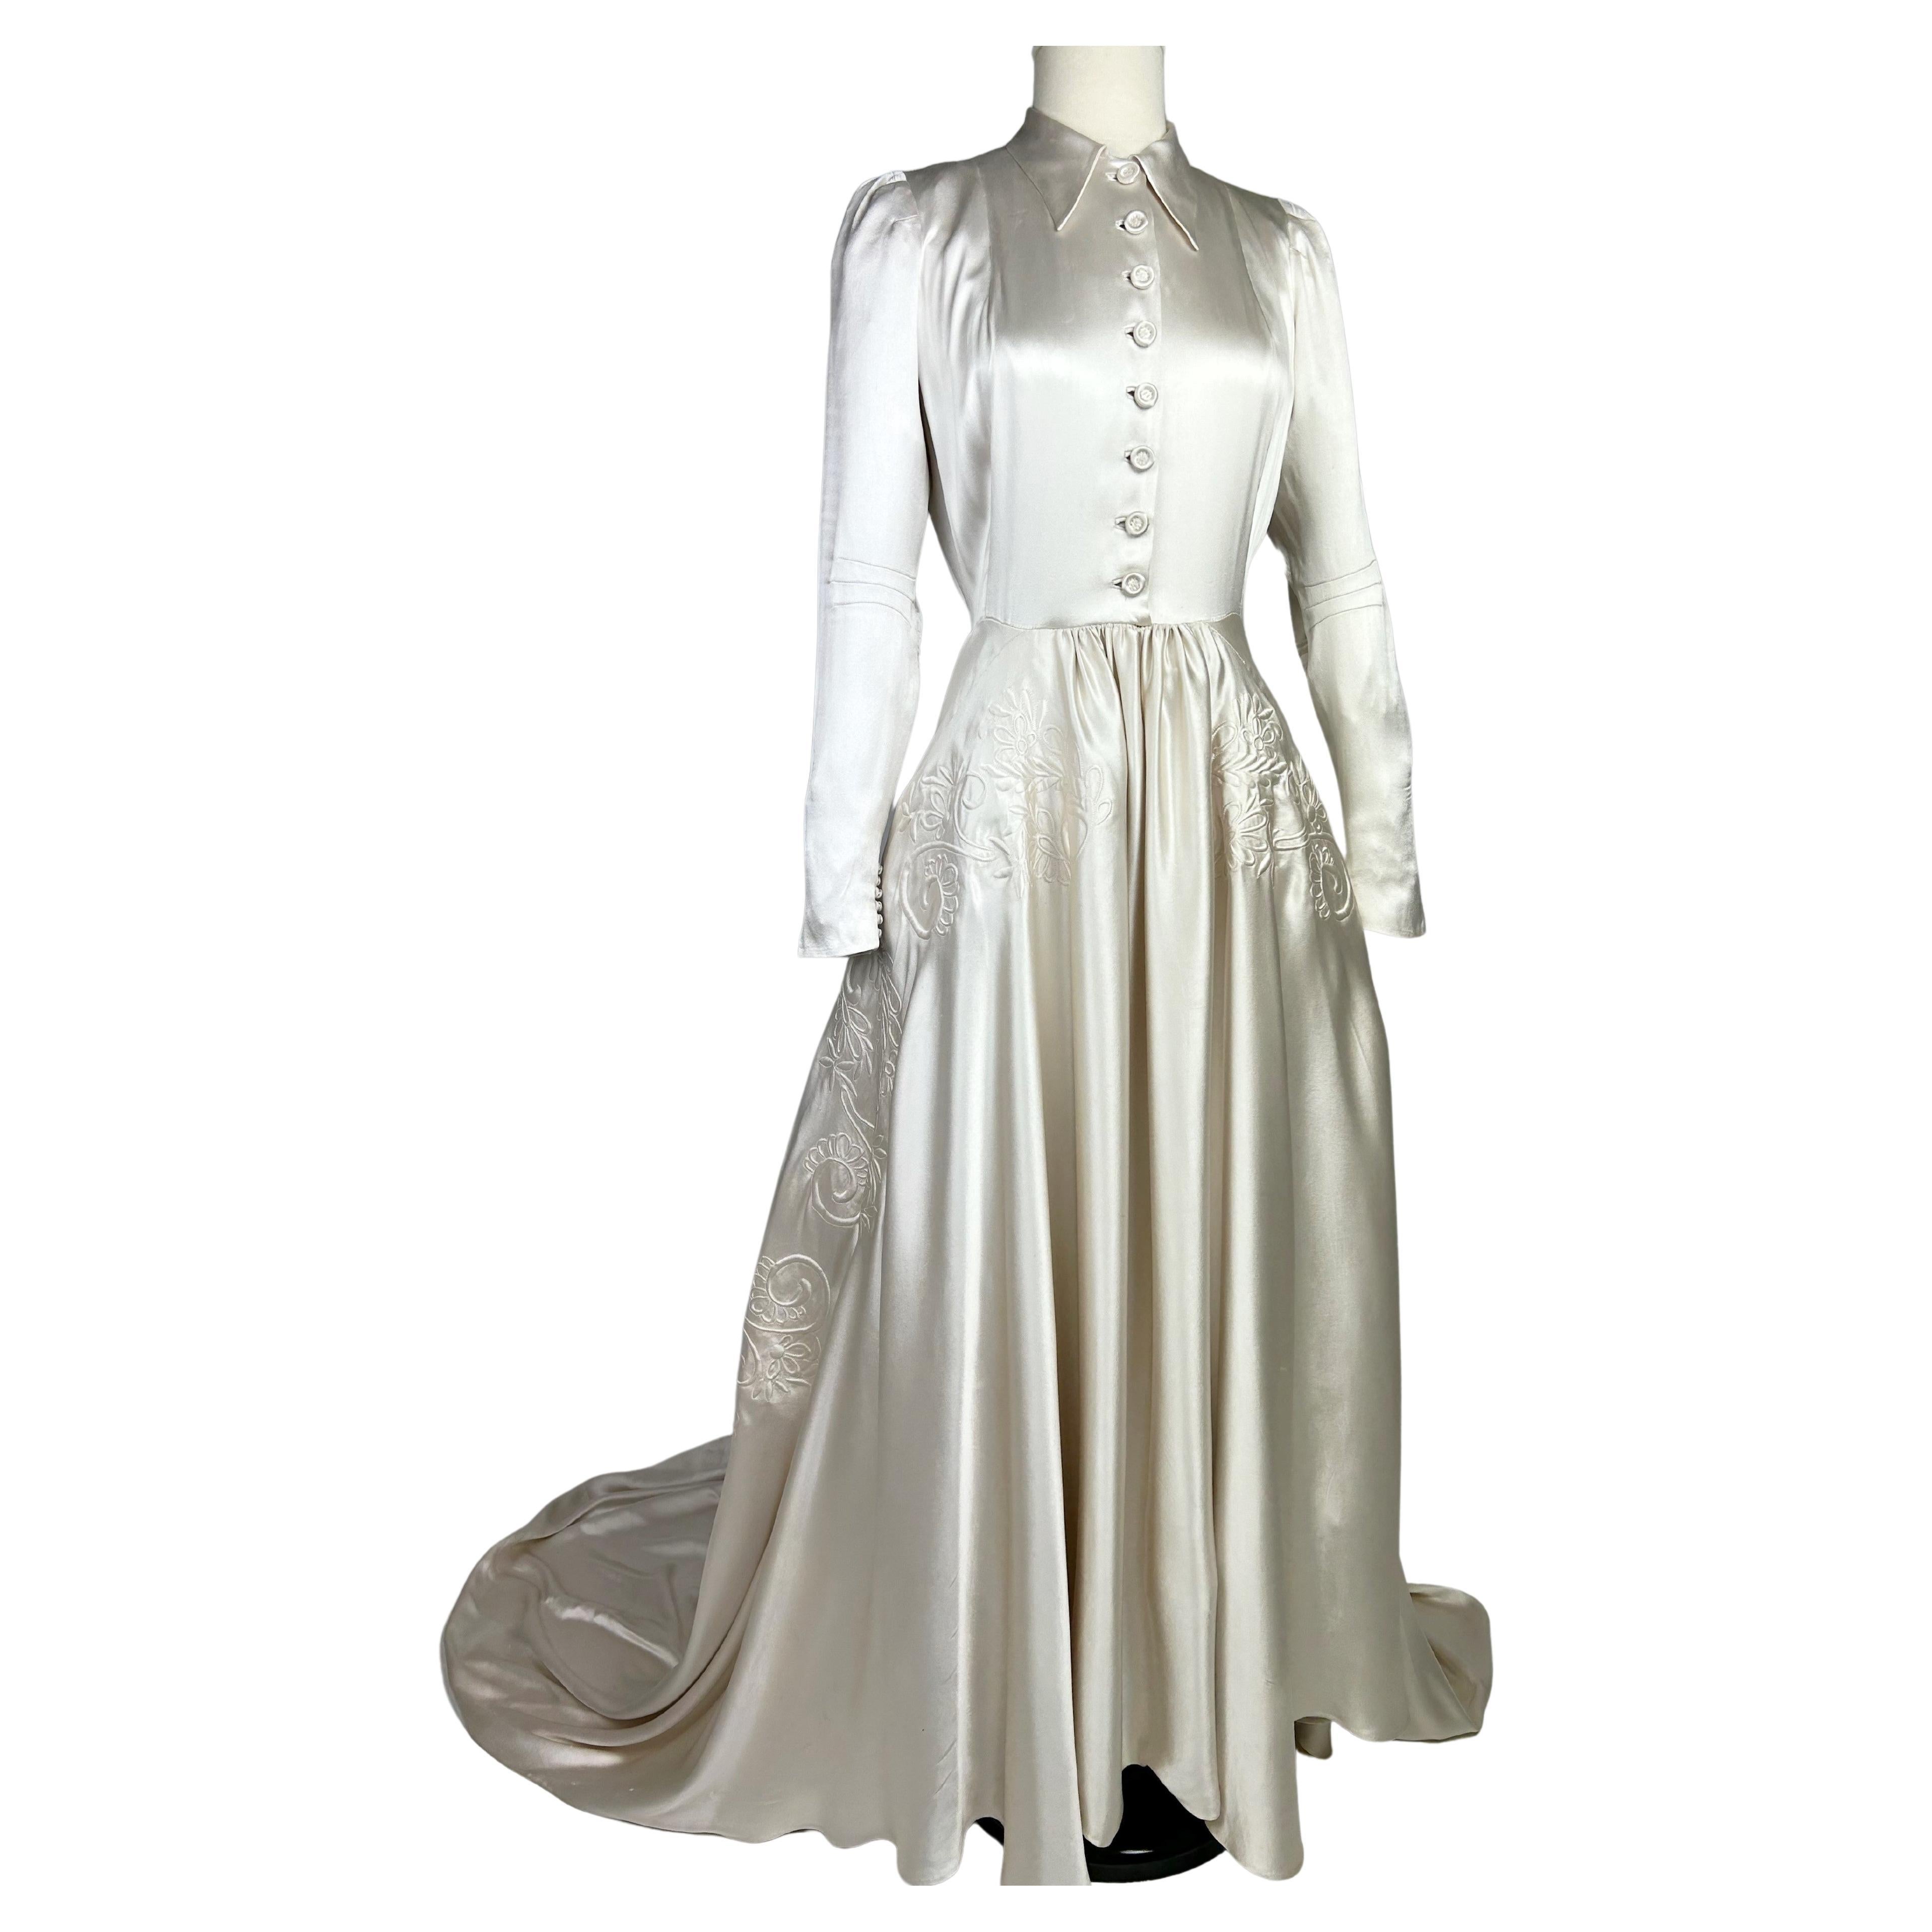 A Champagne Embroidered Satin Wedding Dress with train - France Circa 1940 For Sale